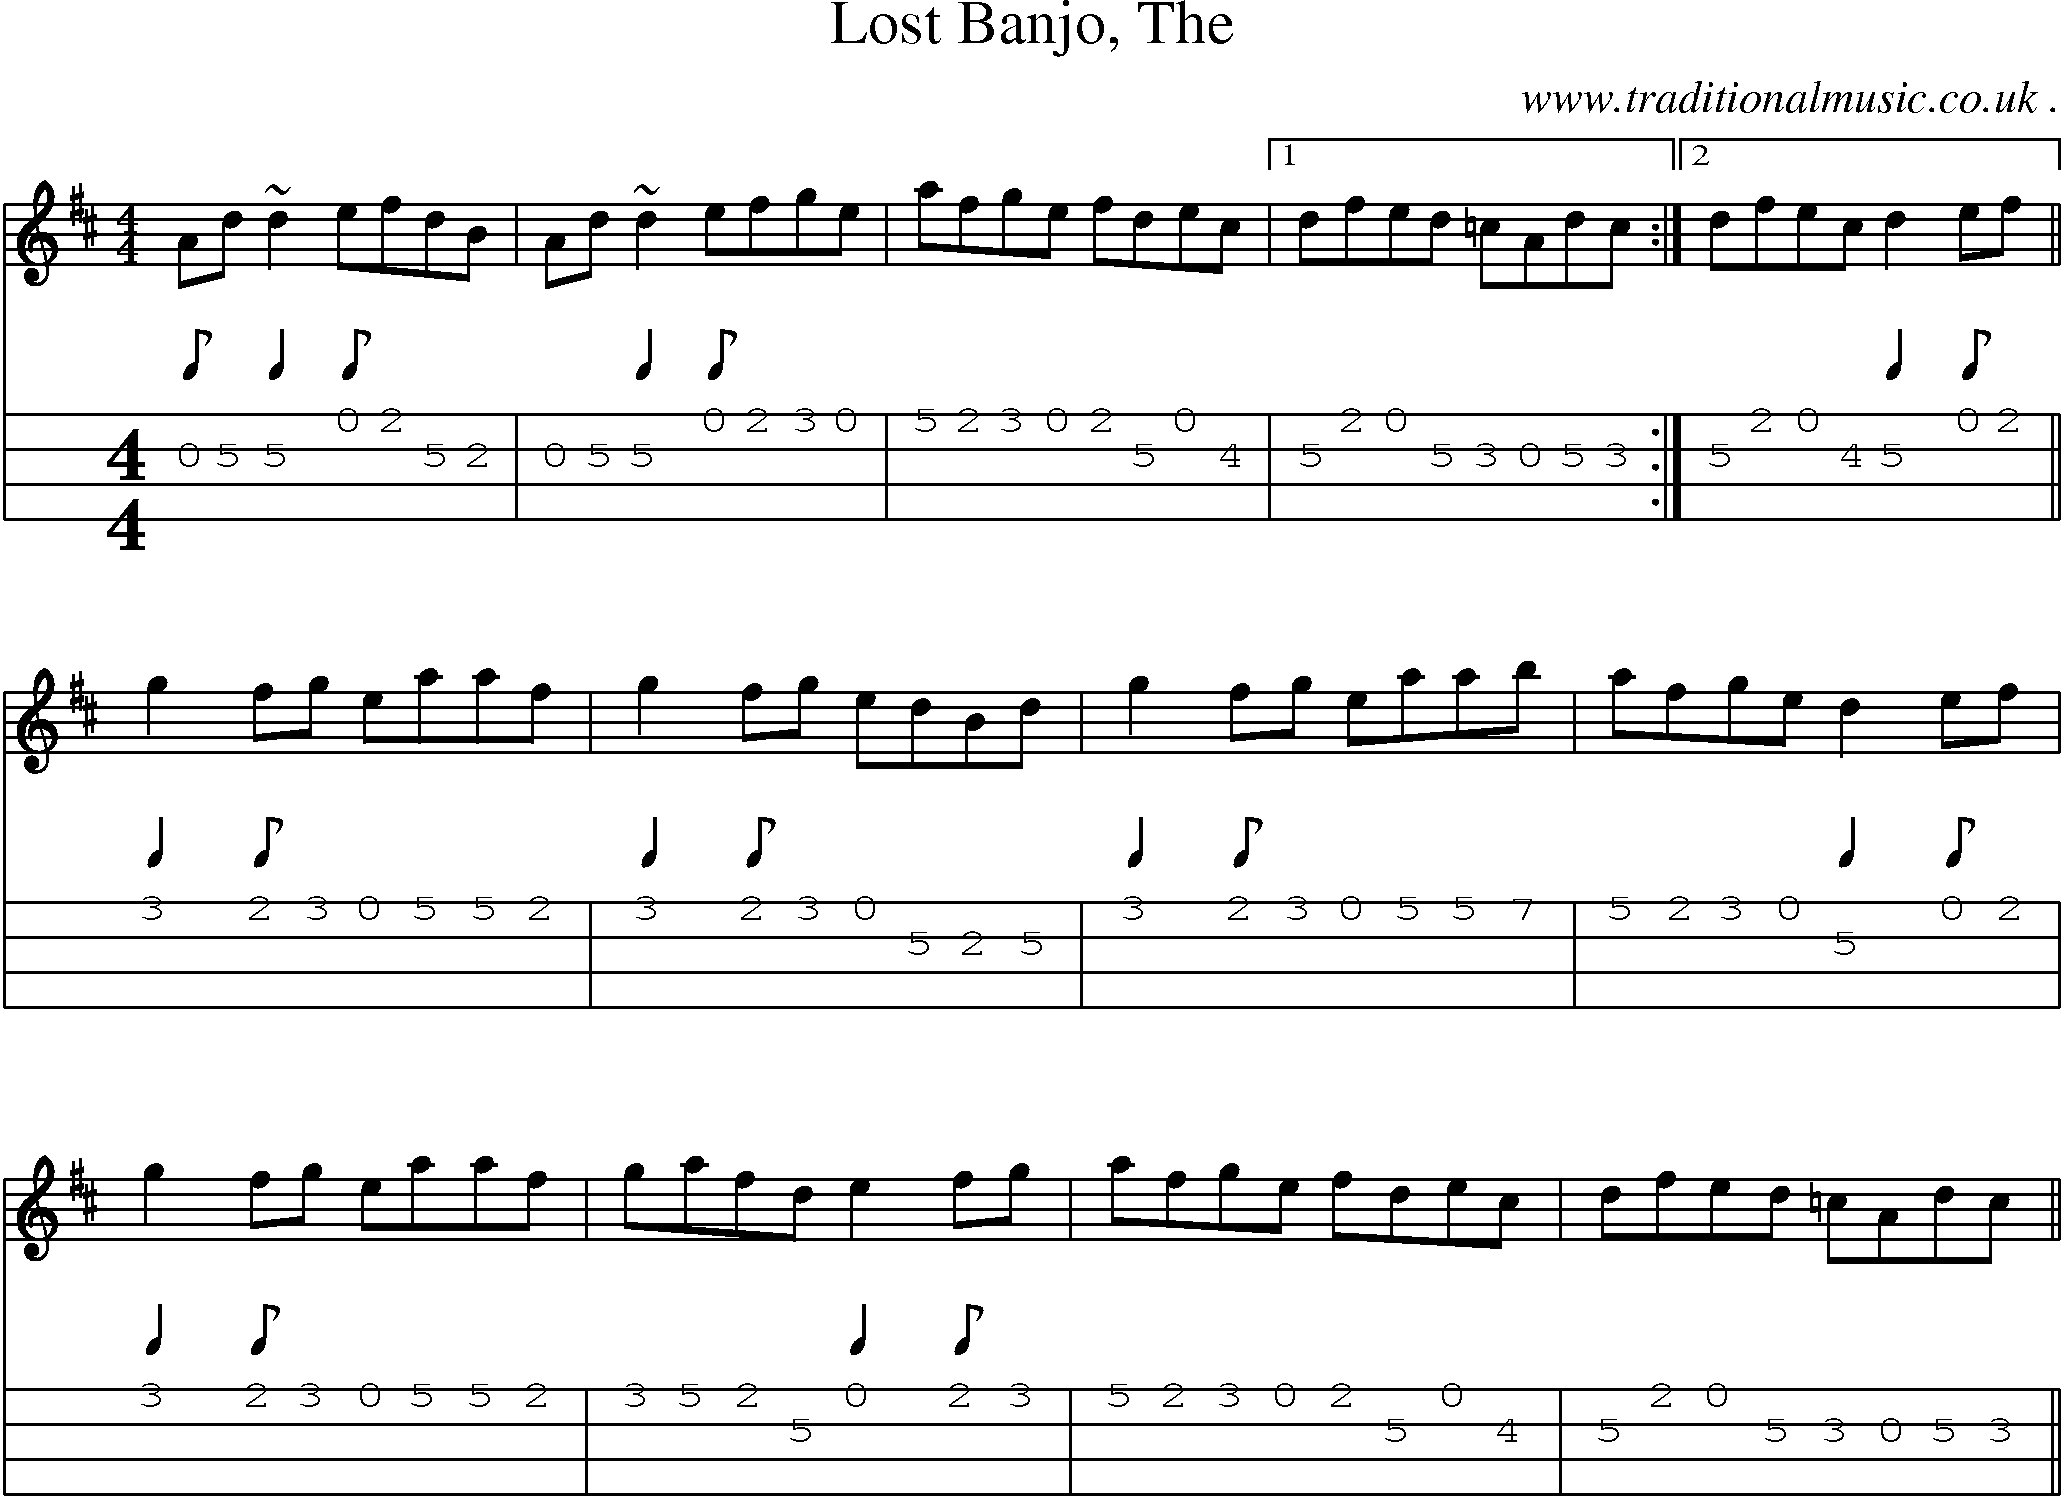 Music Score and Guitar Tabs for Lost Banjo The